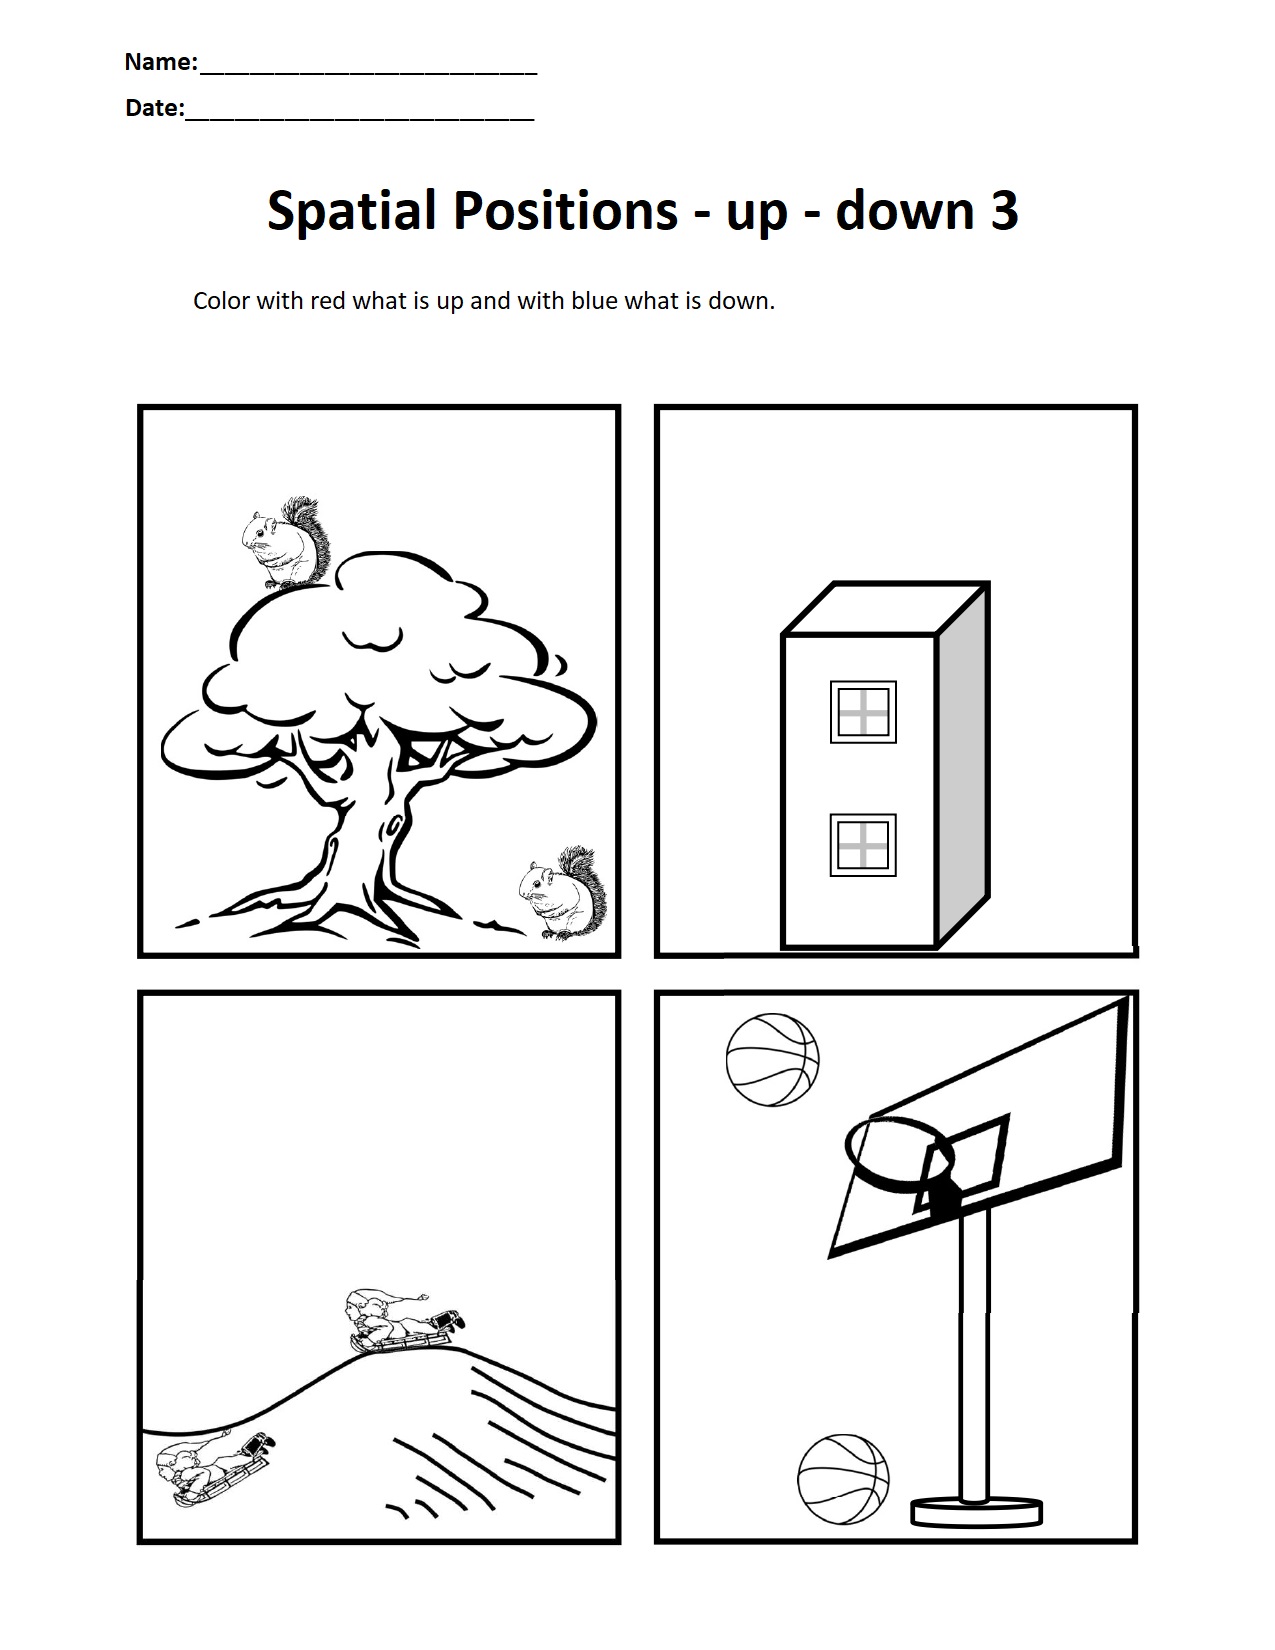 Spatial Positions - up - down 3.jpg